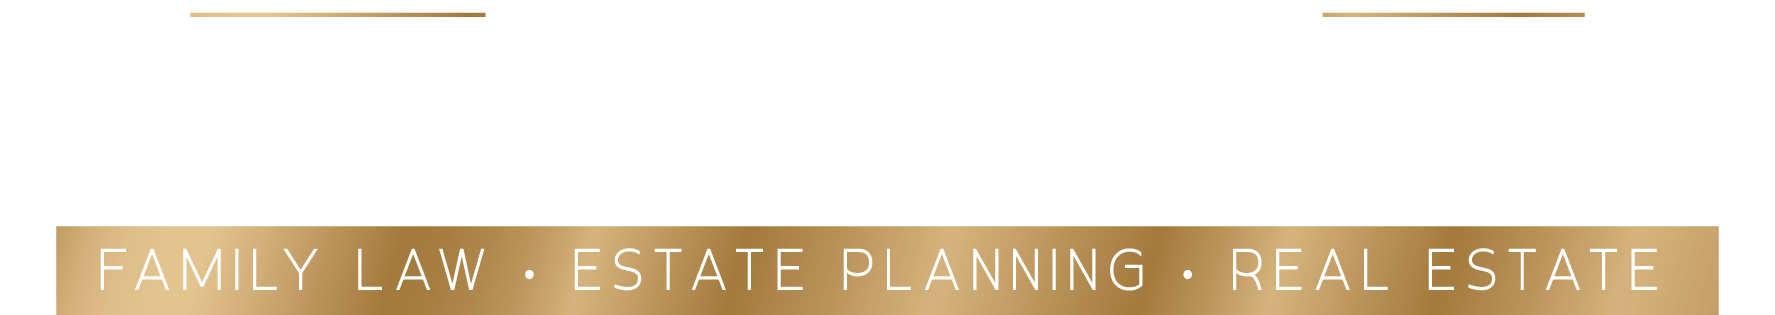 A gold banner with the words `` family law estate planning real estate '' written on it.